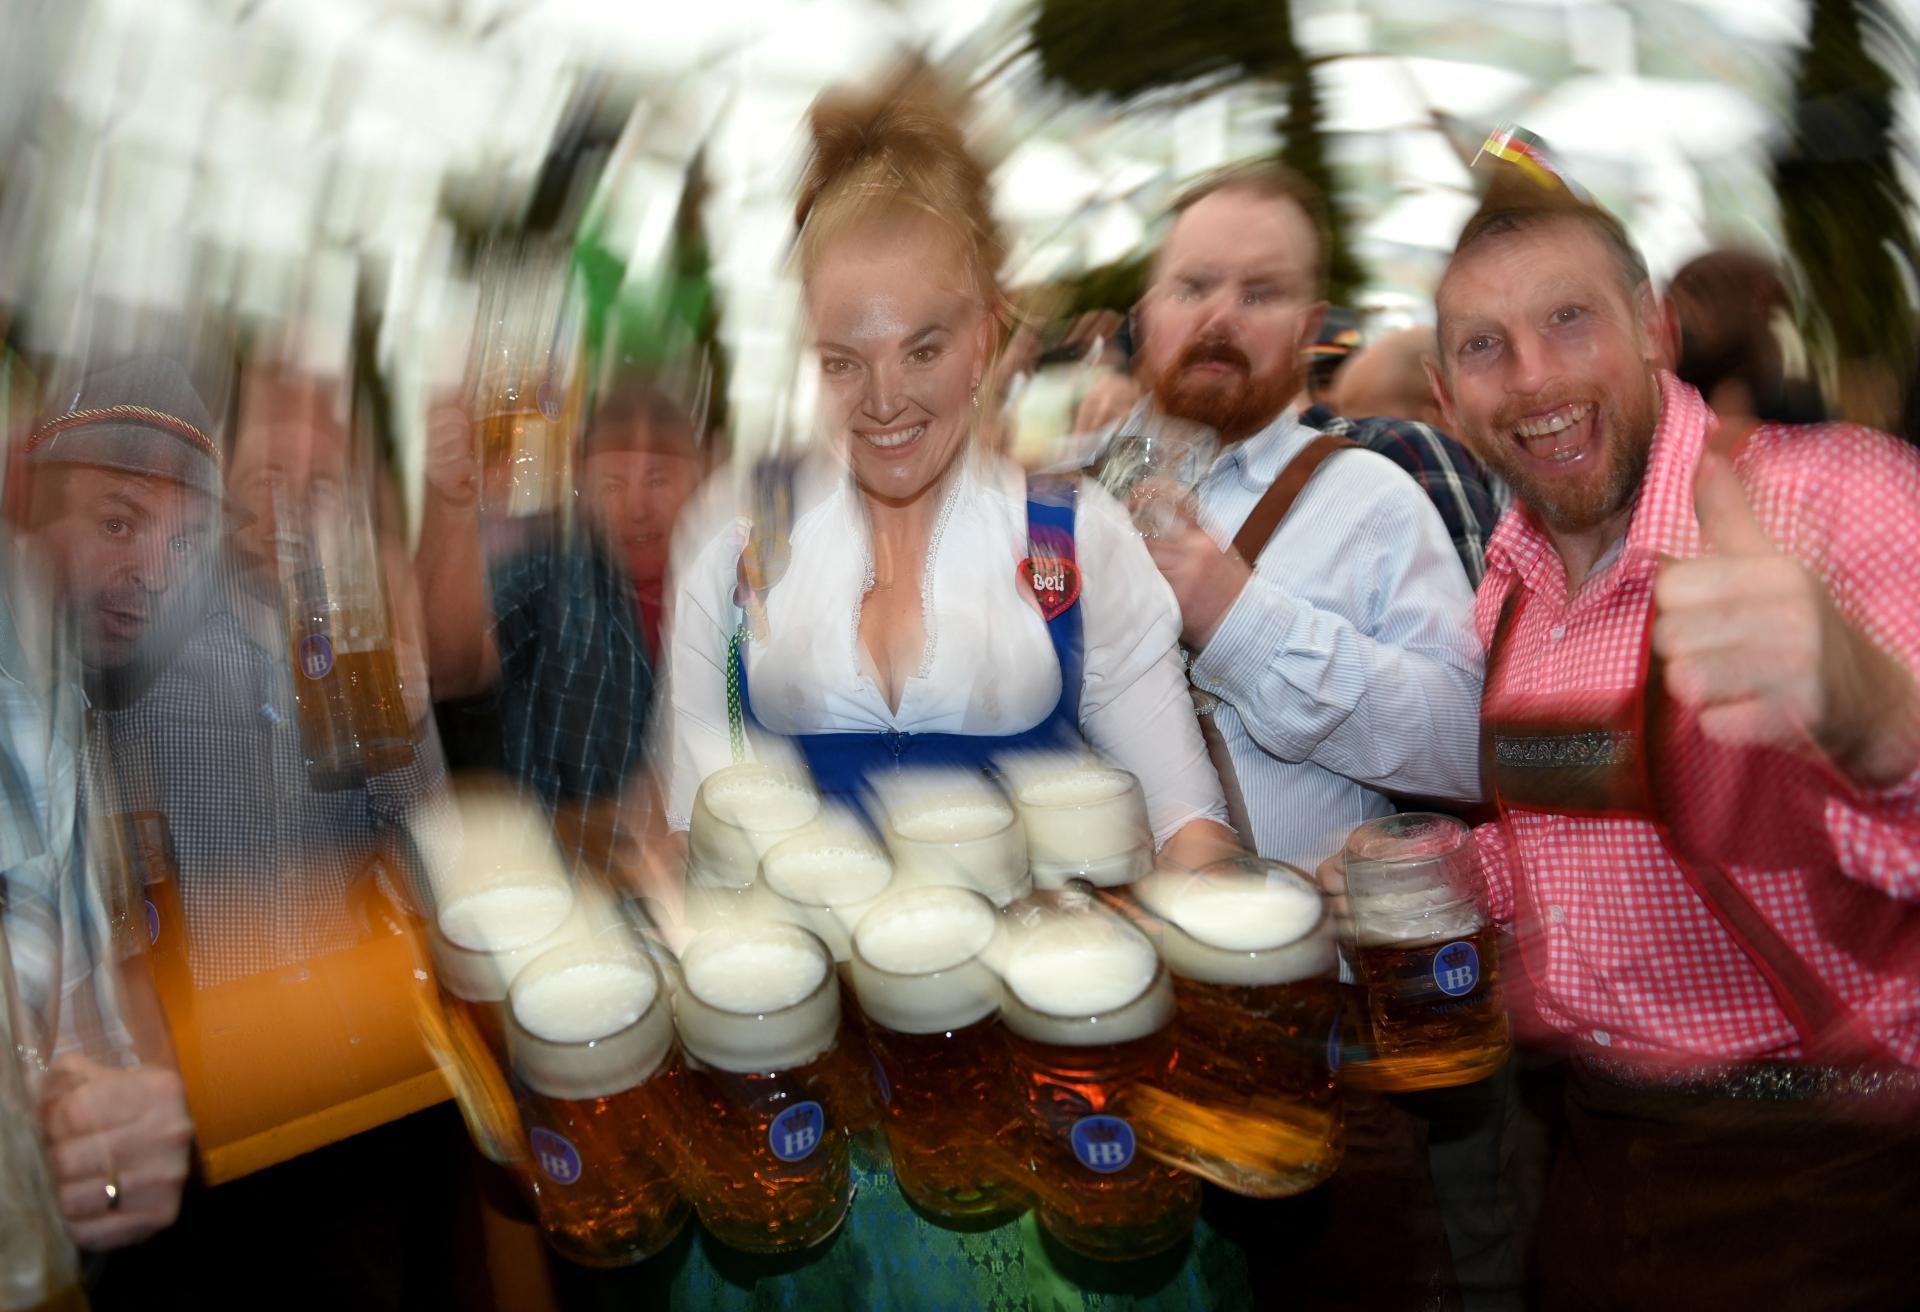 Looking to Buy German Hats in Bulk This Oktoberfest: Captivate Your Guests With These Must-Have Styles